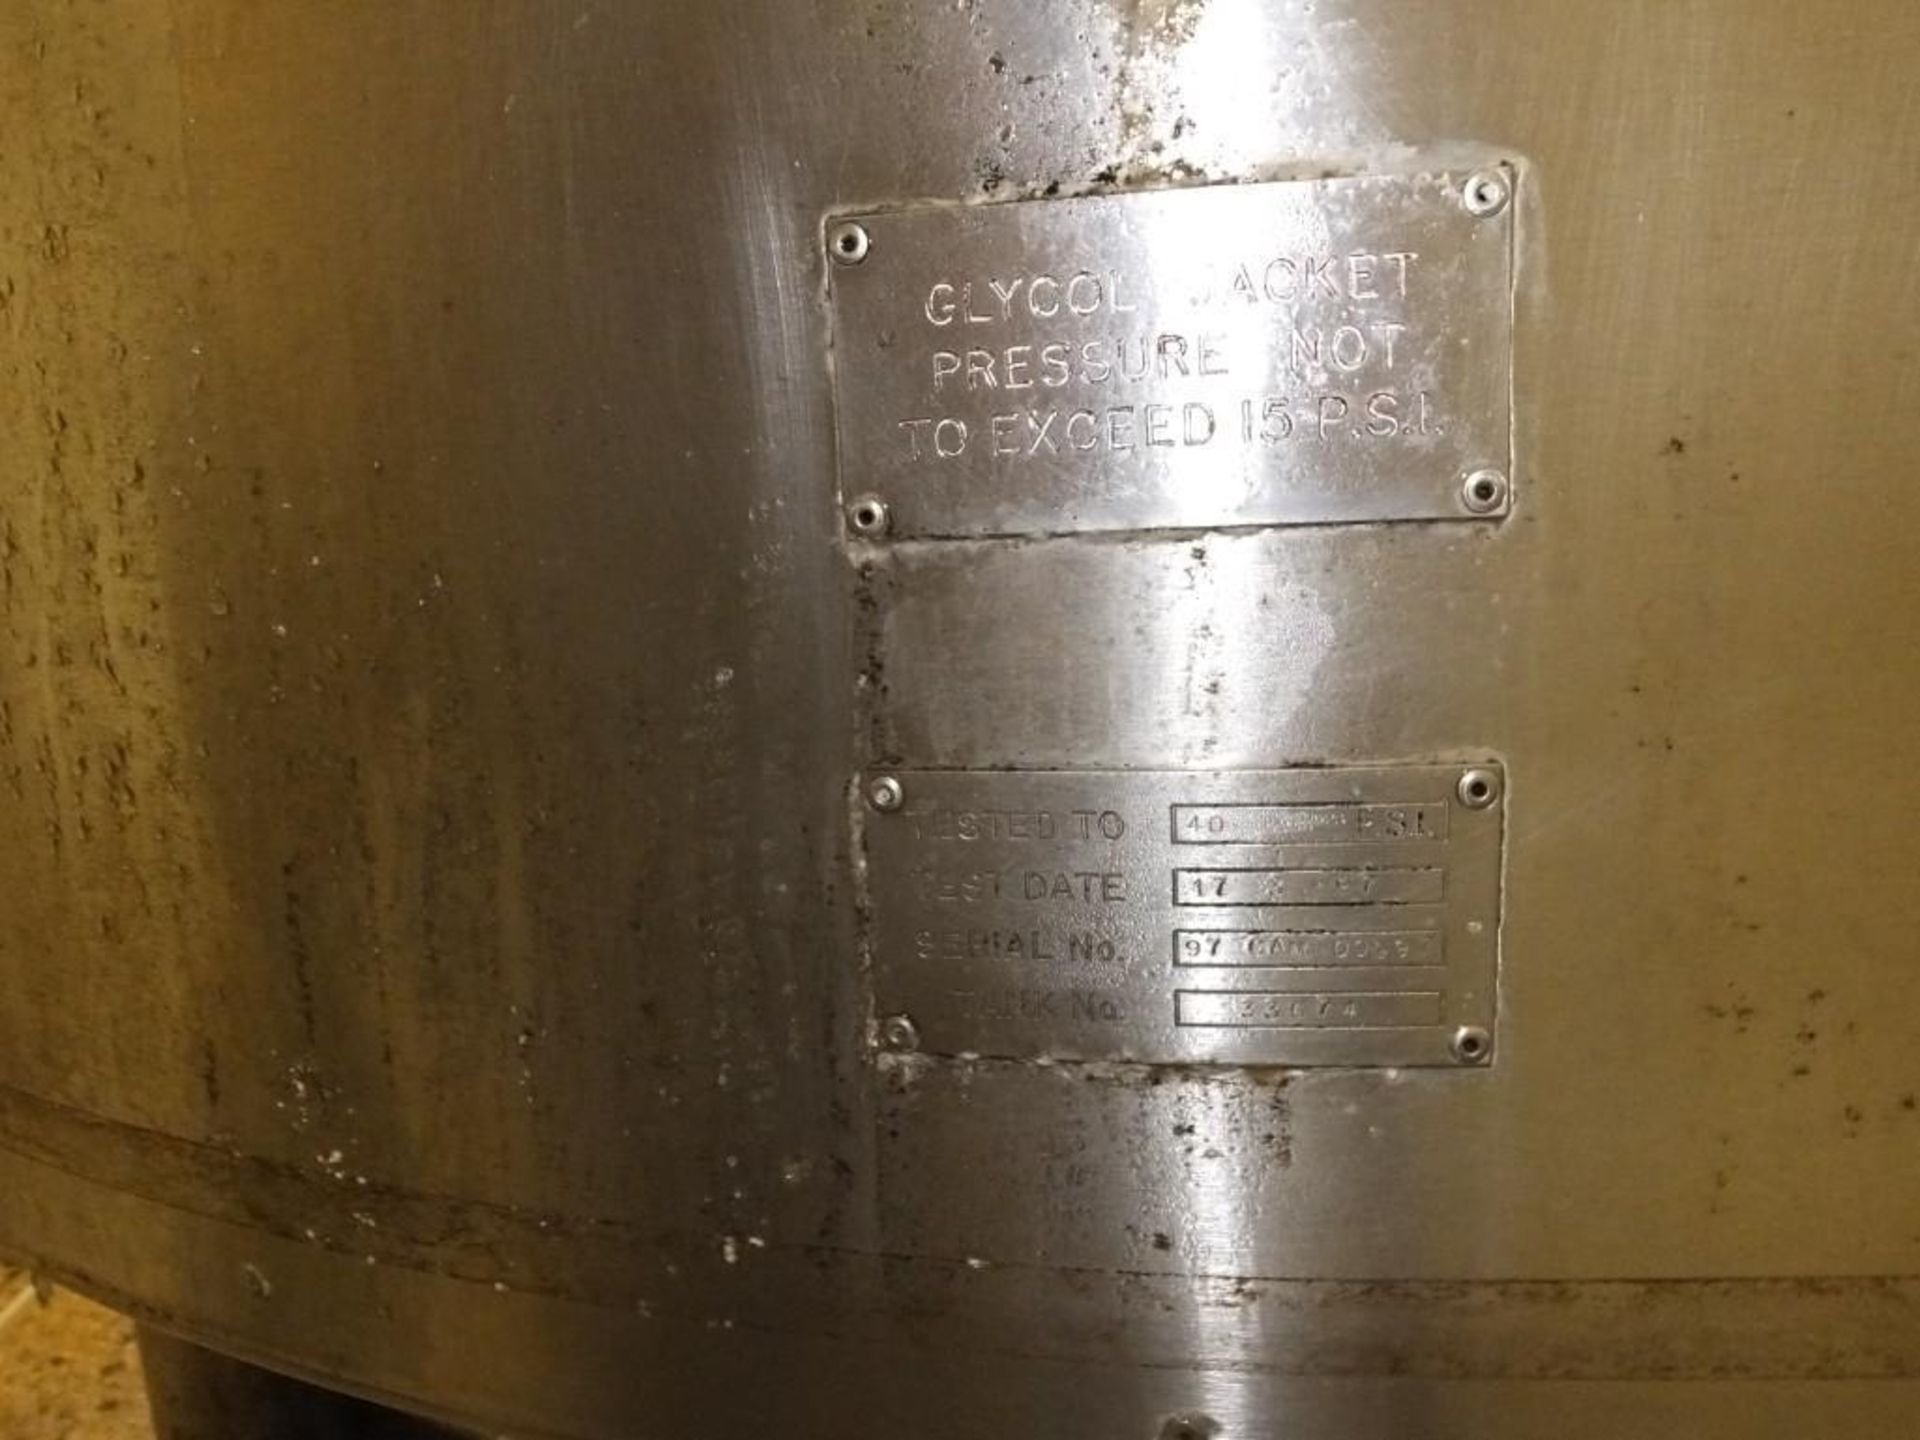 1997 Pugsleys CT07 50 BBL S/S Jacketed Tank - Image 4 of 6